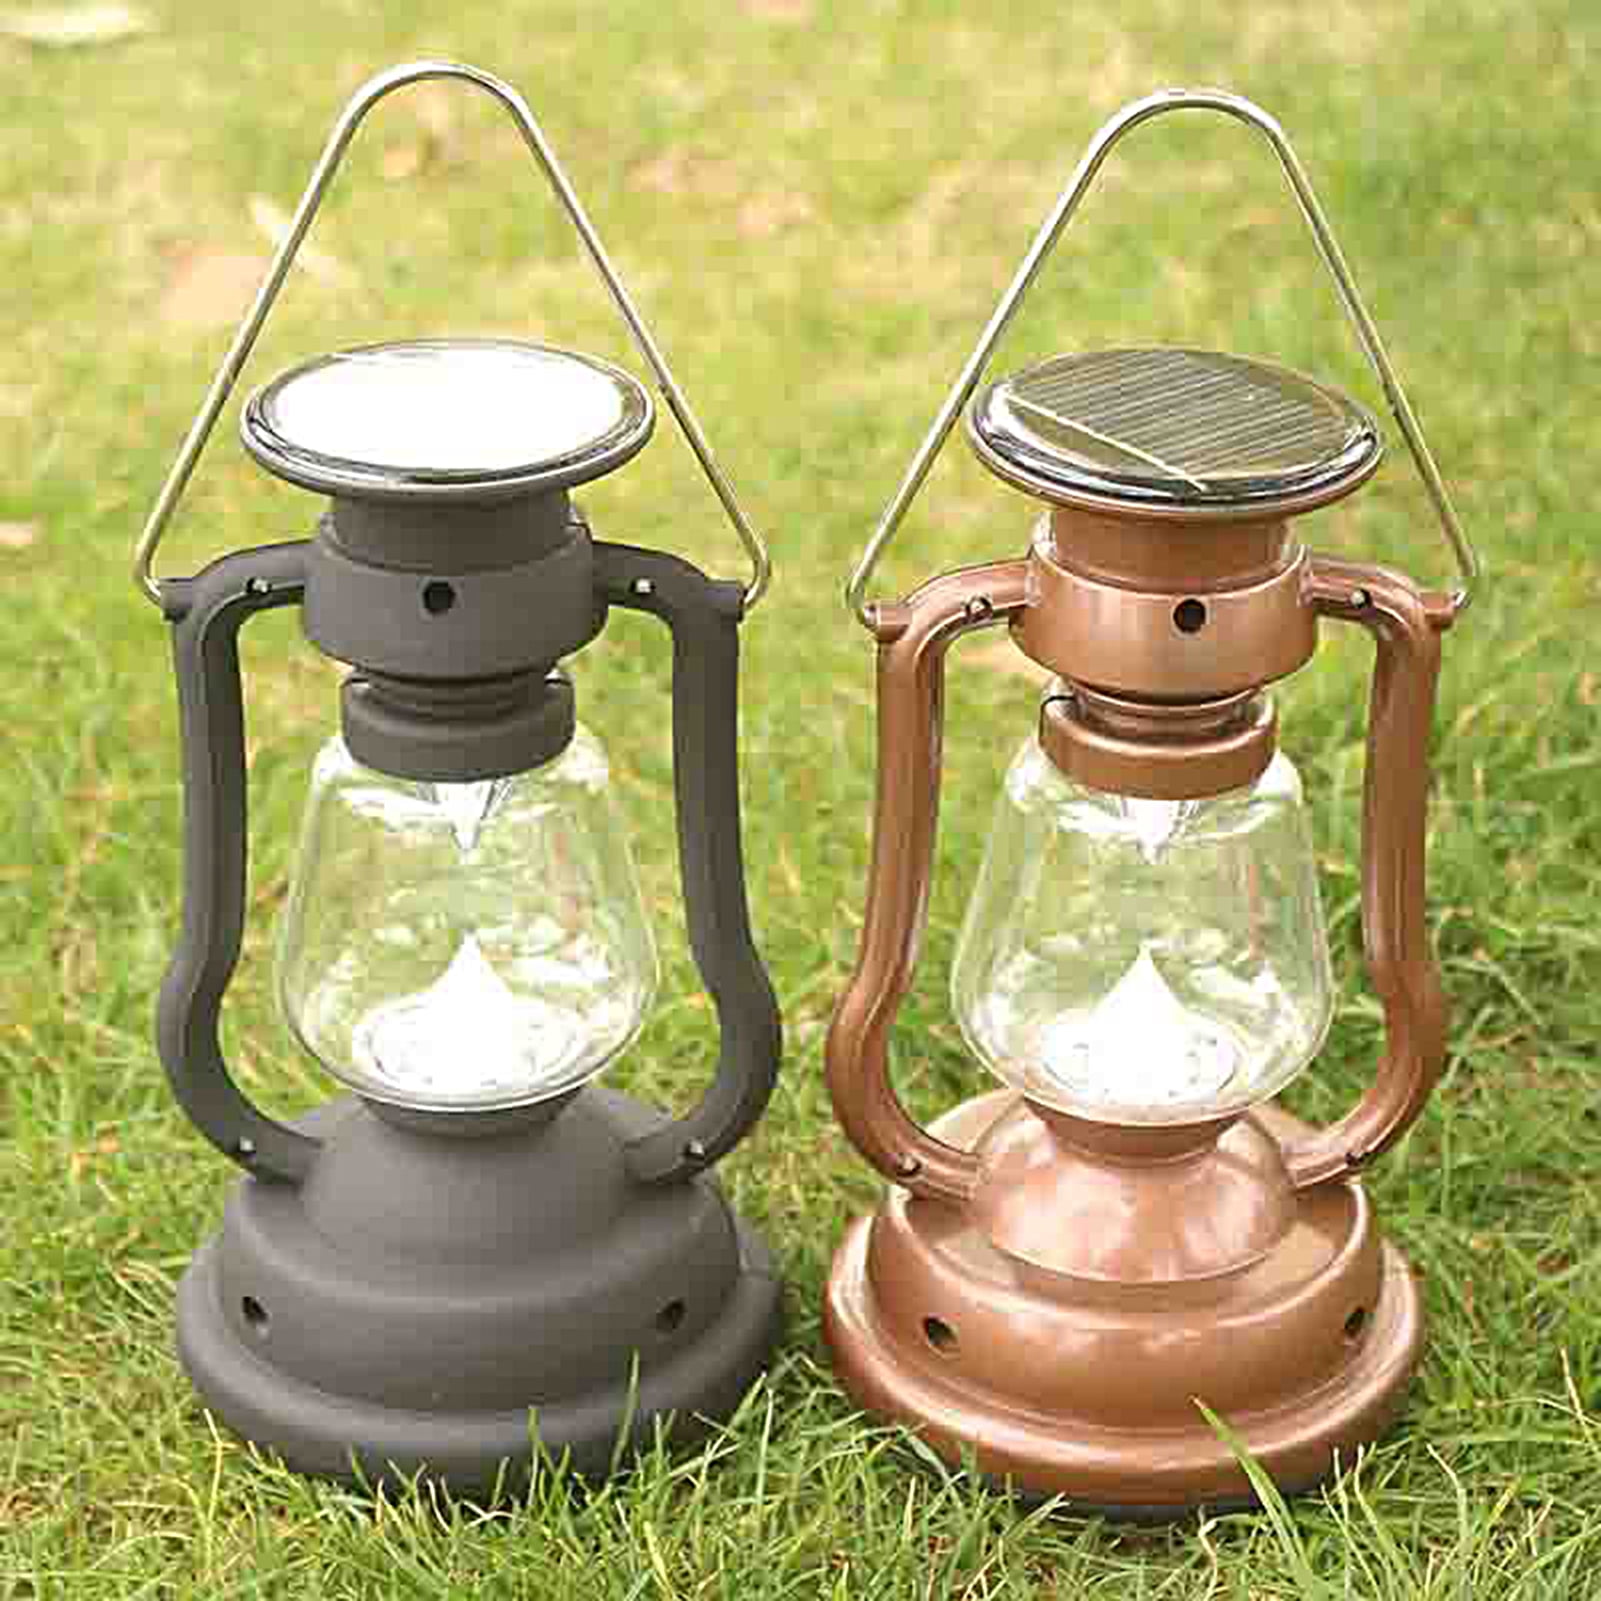 Tresda Camping Lantern Rechargeable, 370LM Dimmable LED Vintage Battery  Powered Lanterns, Waterproof LED Retro Camping Lights for Camping, Power